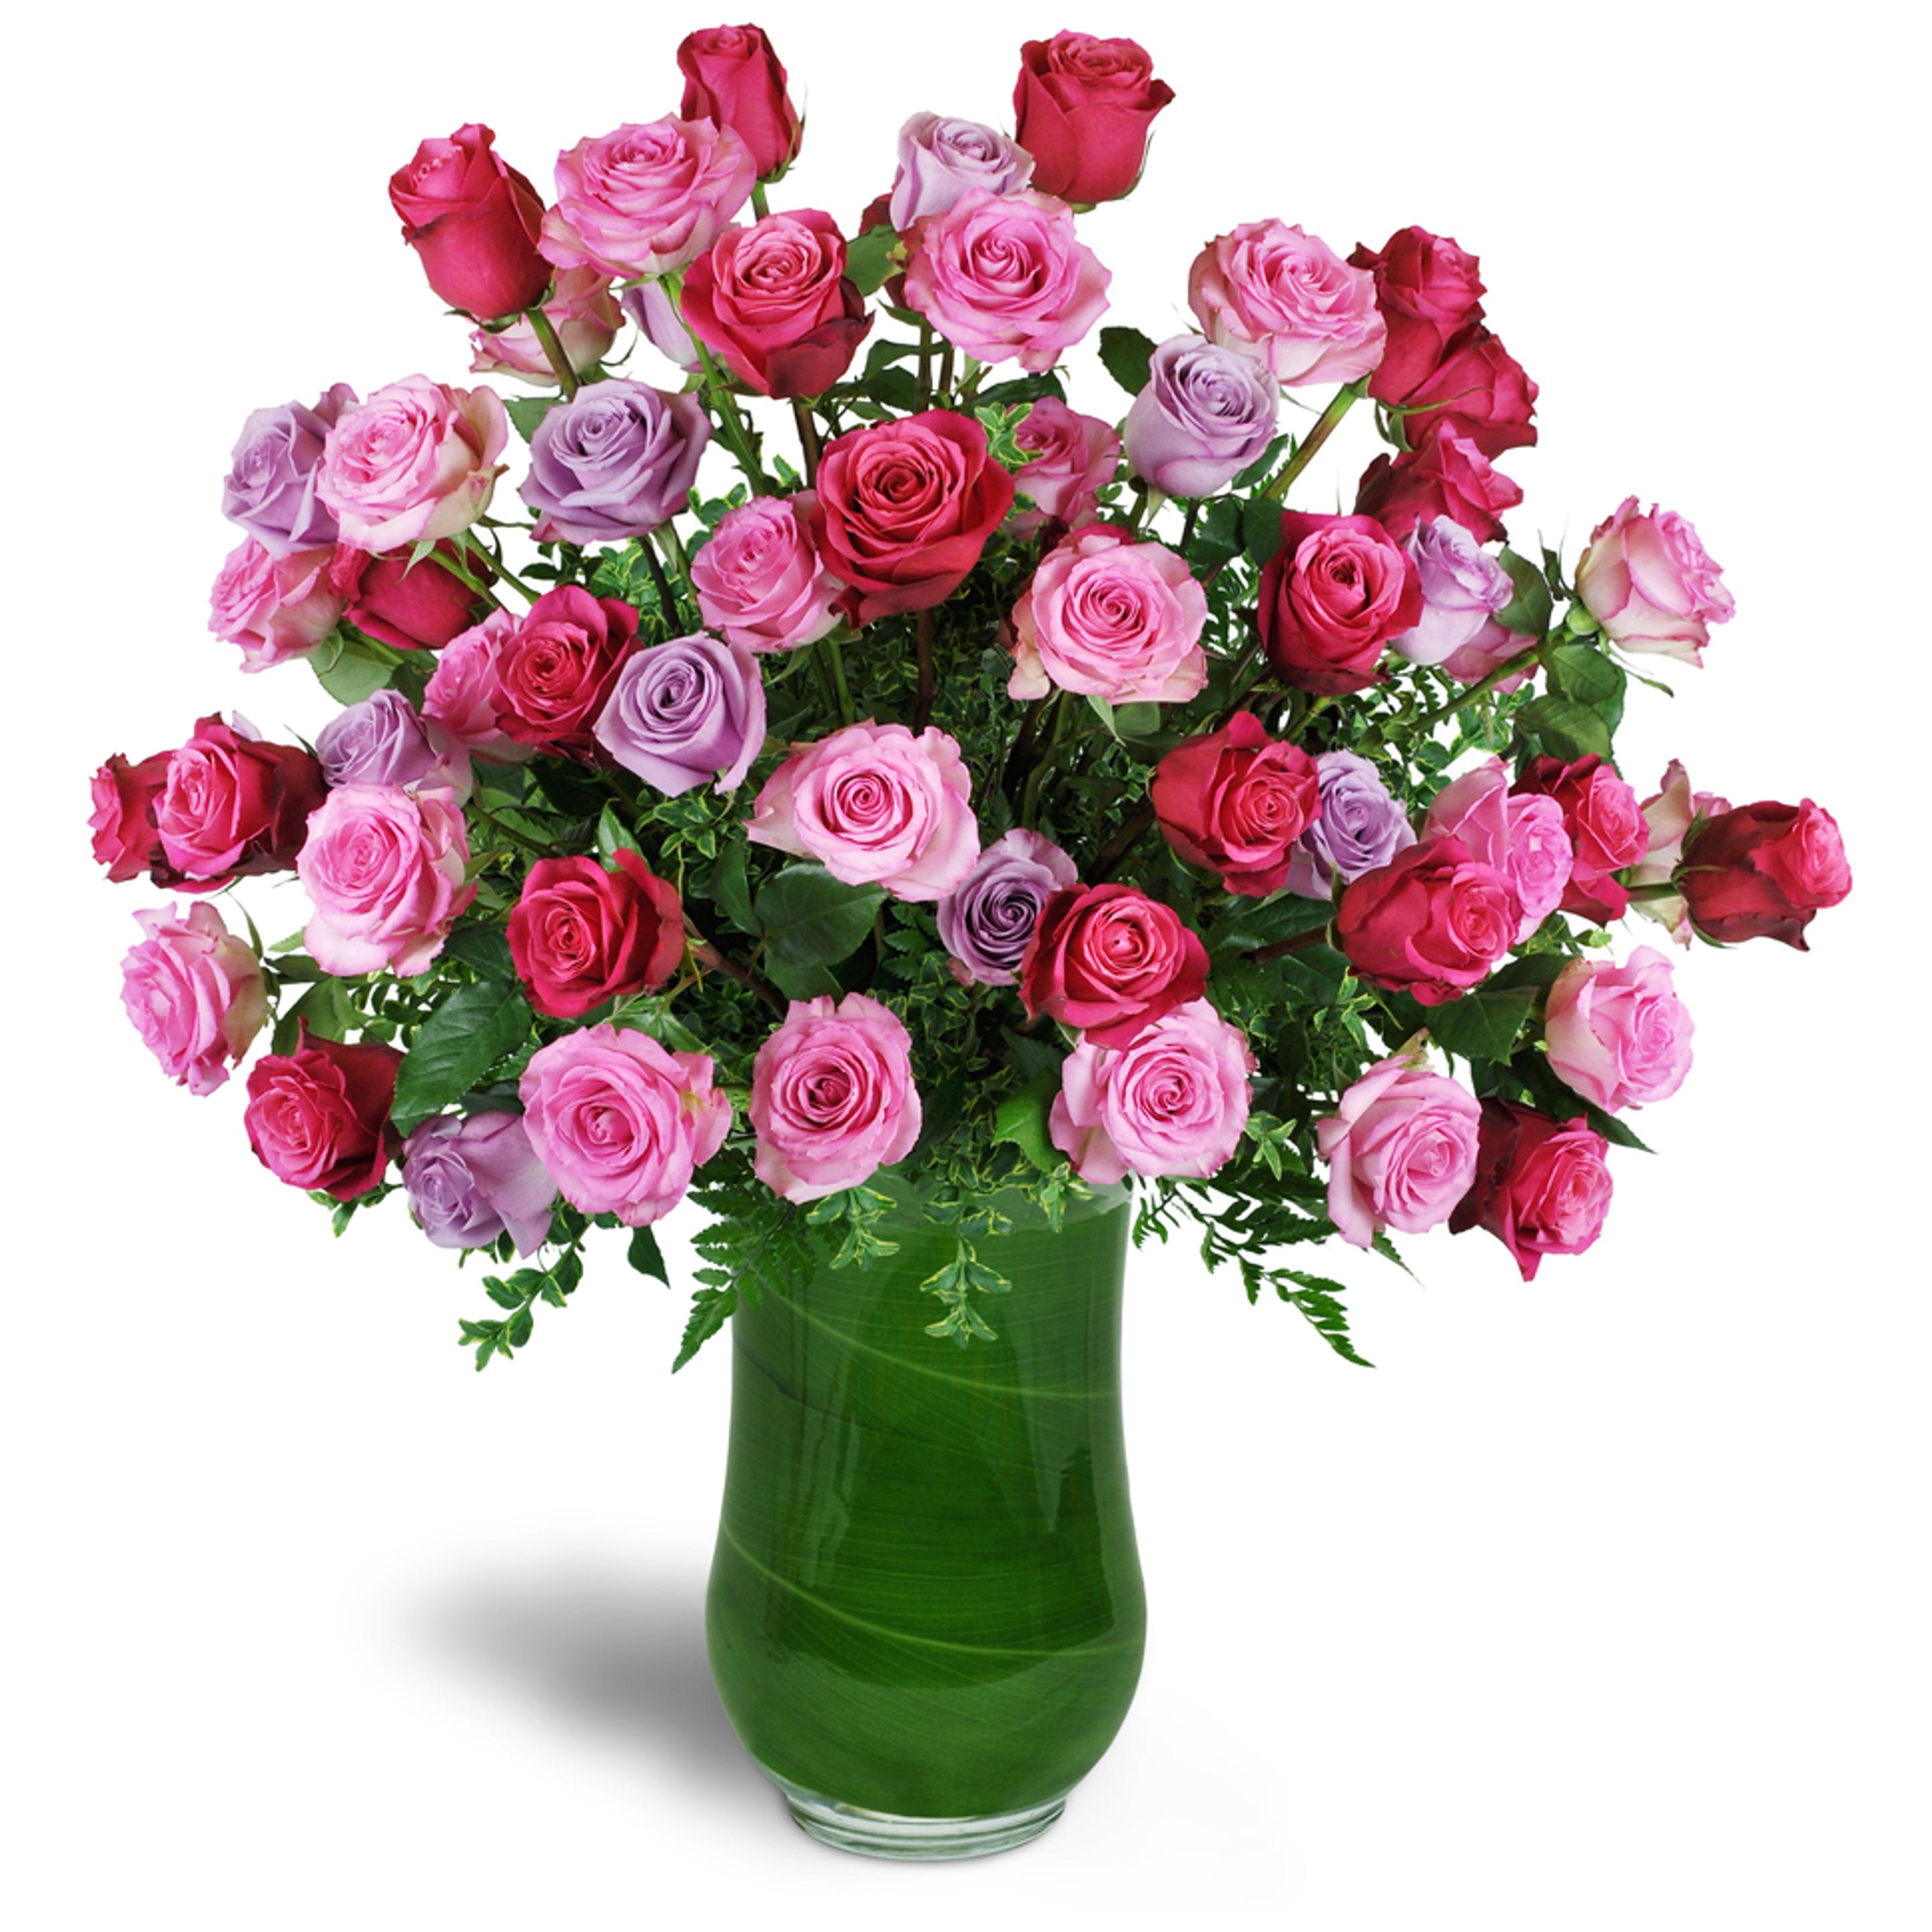 Pink flower arrangement - dozen premium roses in fuchsia, pink, and lavender are expertly arranged in a clear vase.